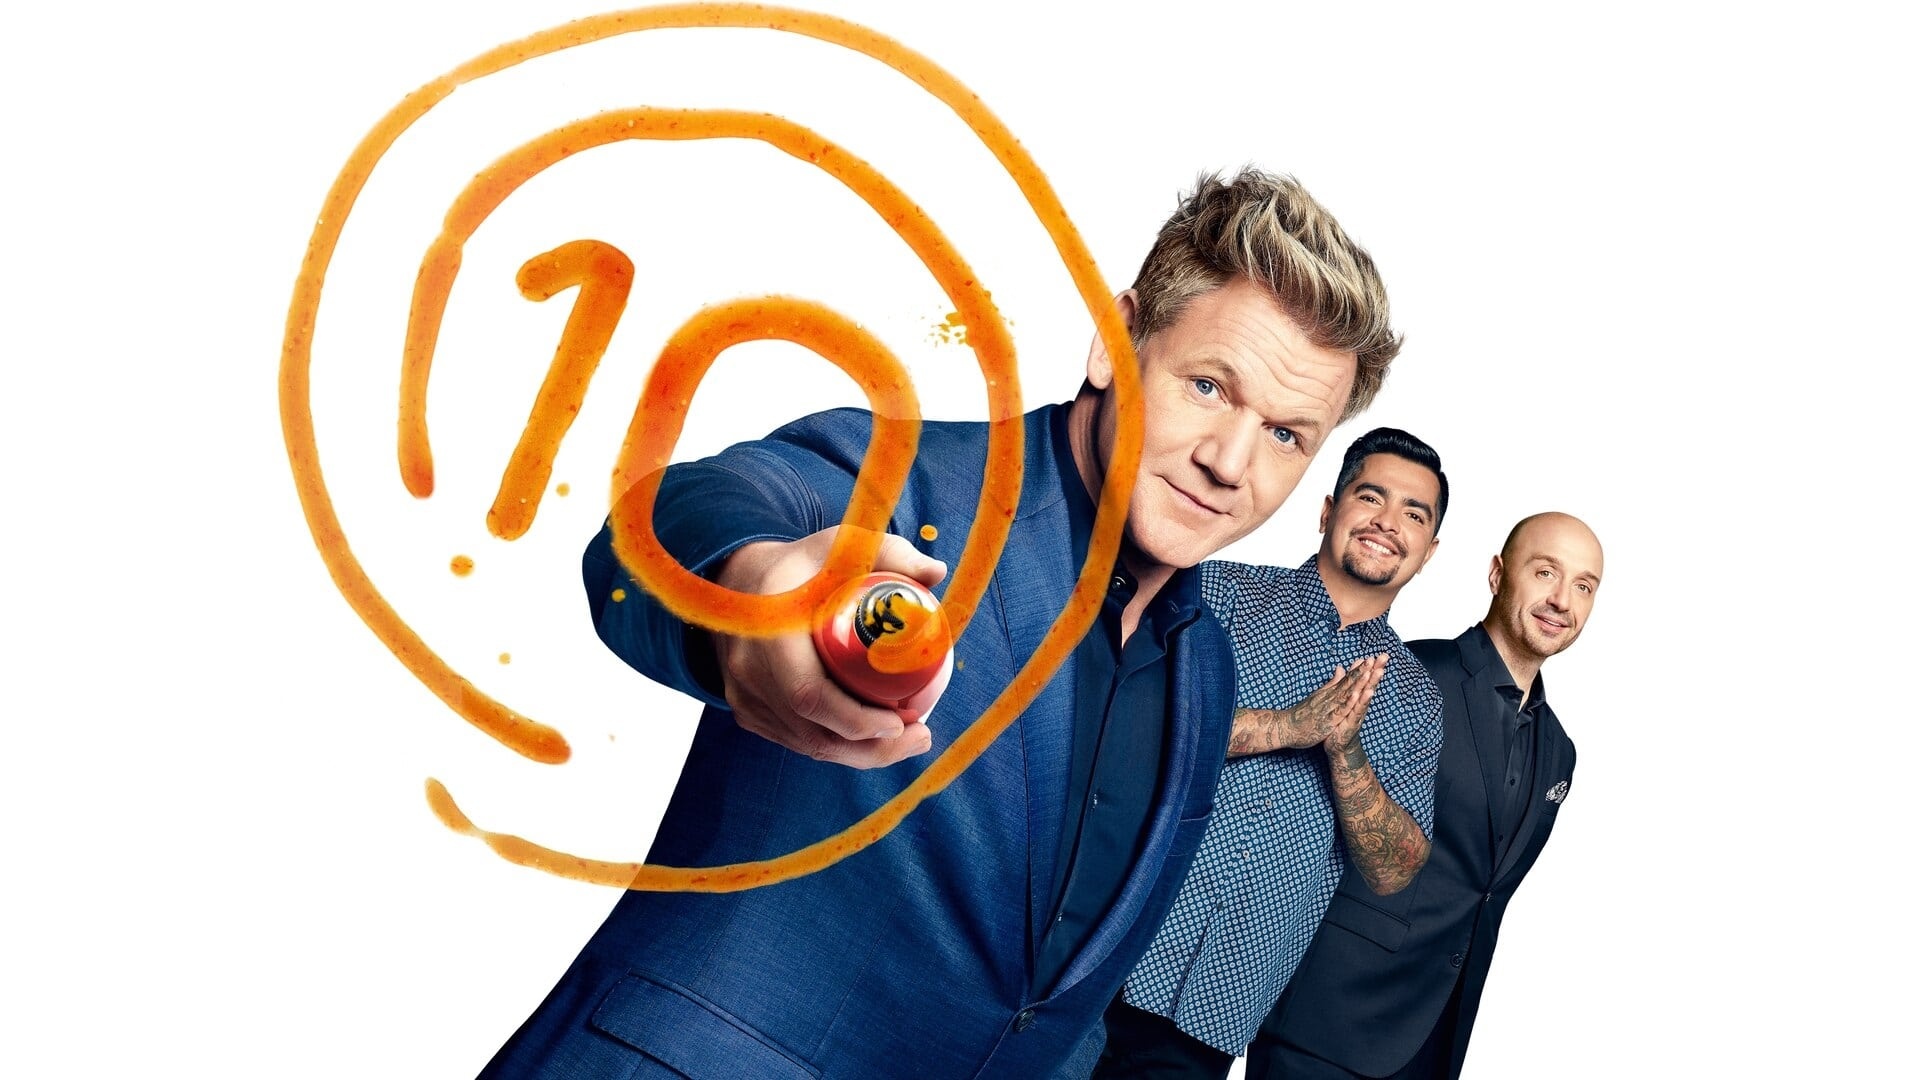 Masterchef, TV series, High-stakes cooking, Gourmet dishes, 1920x1080 Full HD Desktop